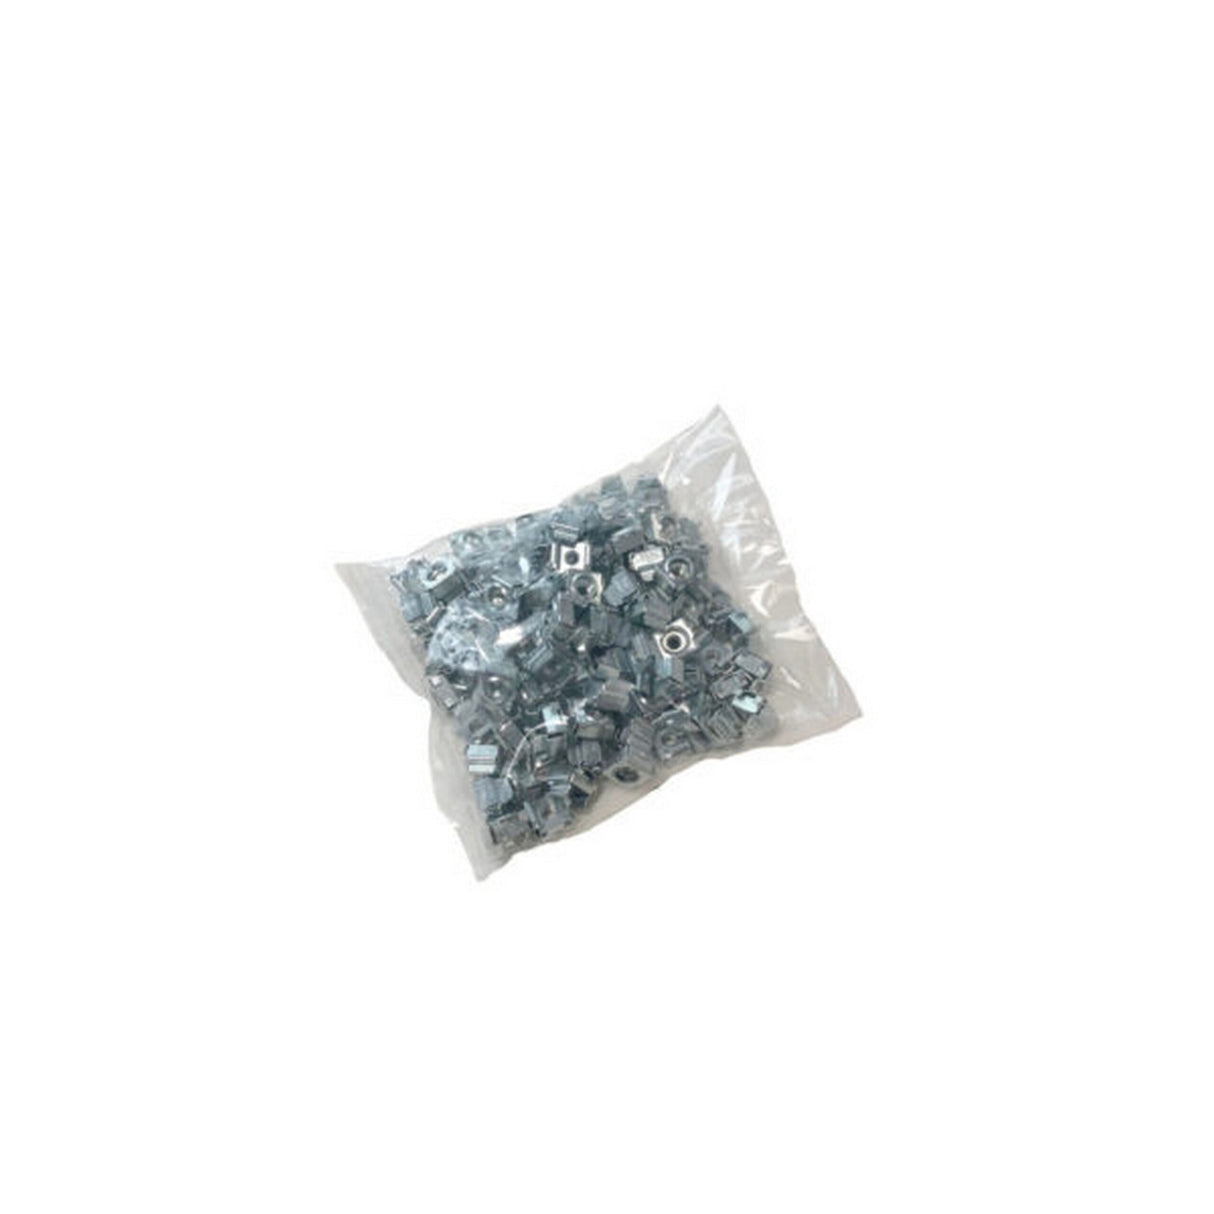 Lowell RCN1032-100 10-32 Cage Nuts, 100-Pieces Bag